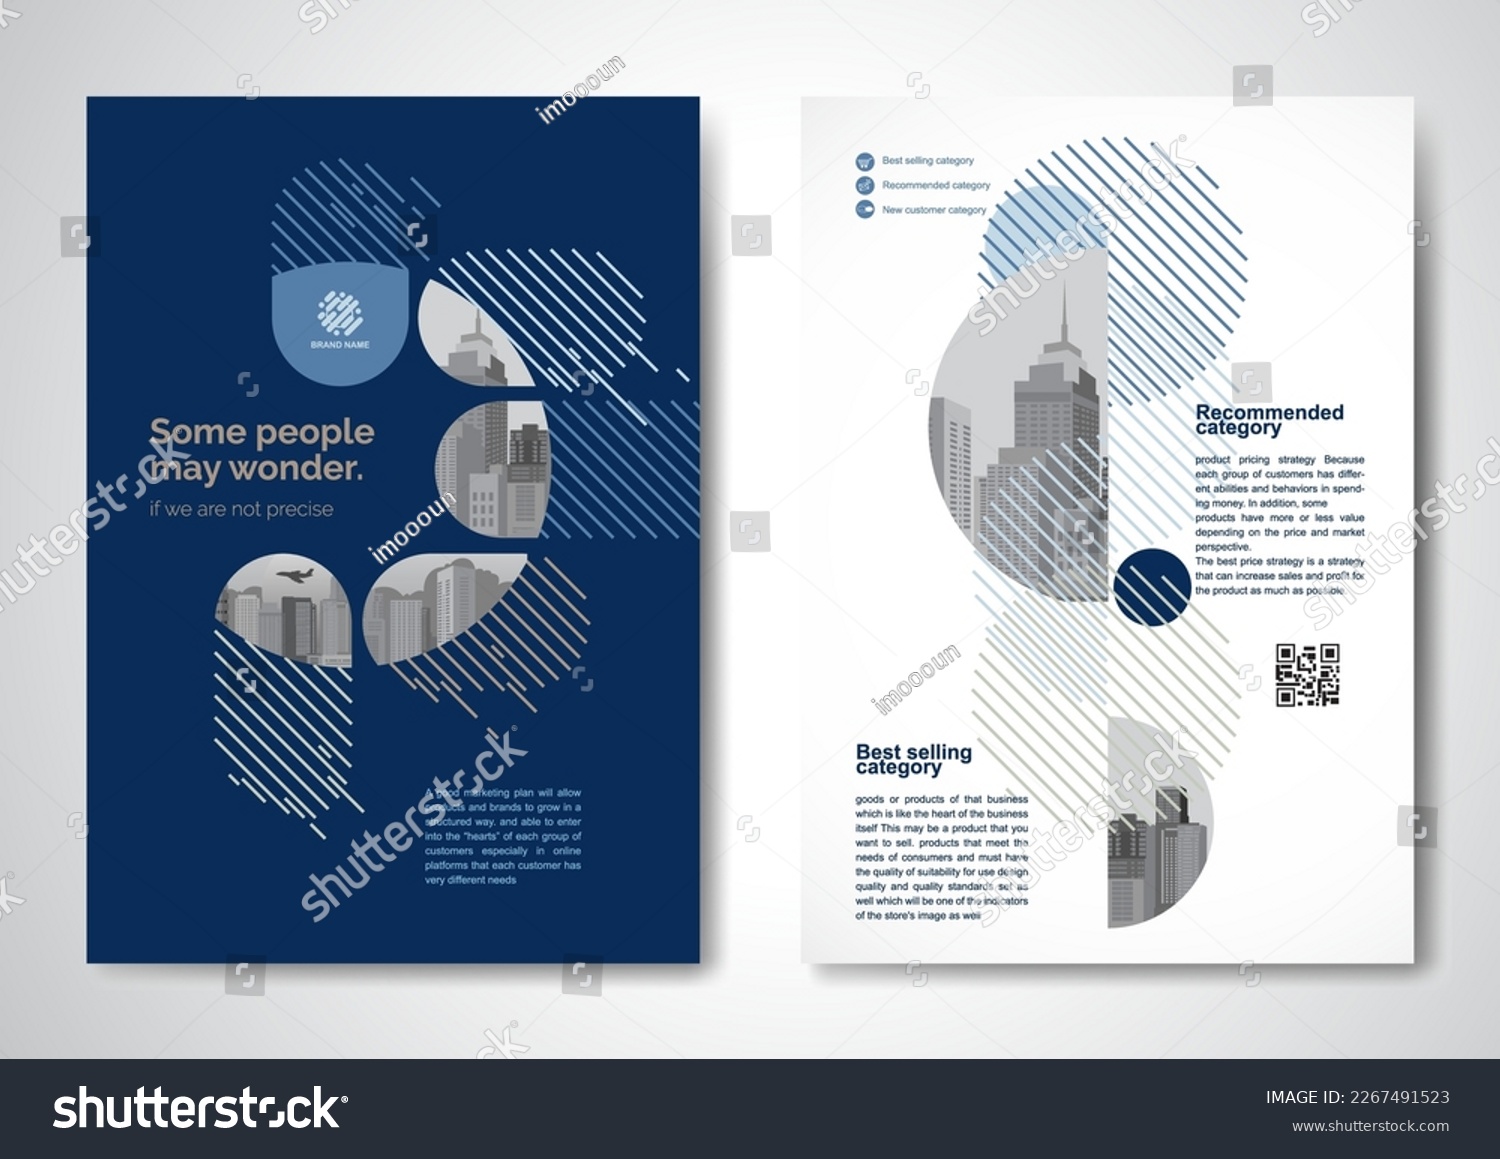 Template vector design for Brochure, AnnualReport, Magazine, Poster, Corporate Presentation, Portfolio, Flyer, infographic, layout modern with blue color size A4, Front and back, Easy to use and edit. #2267491523